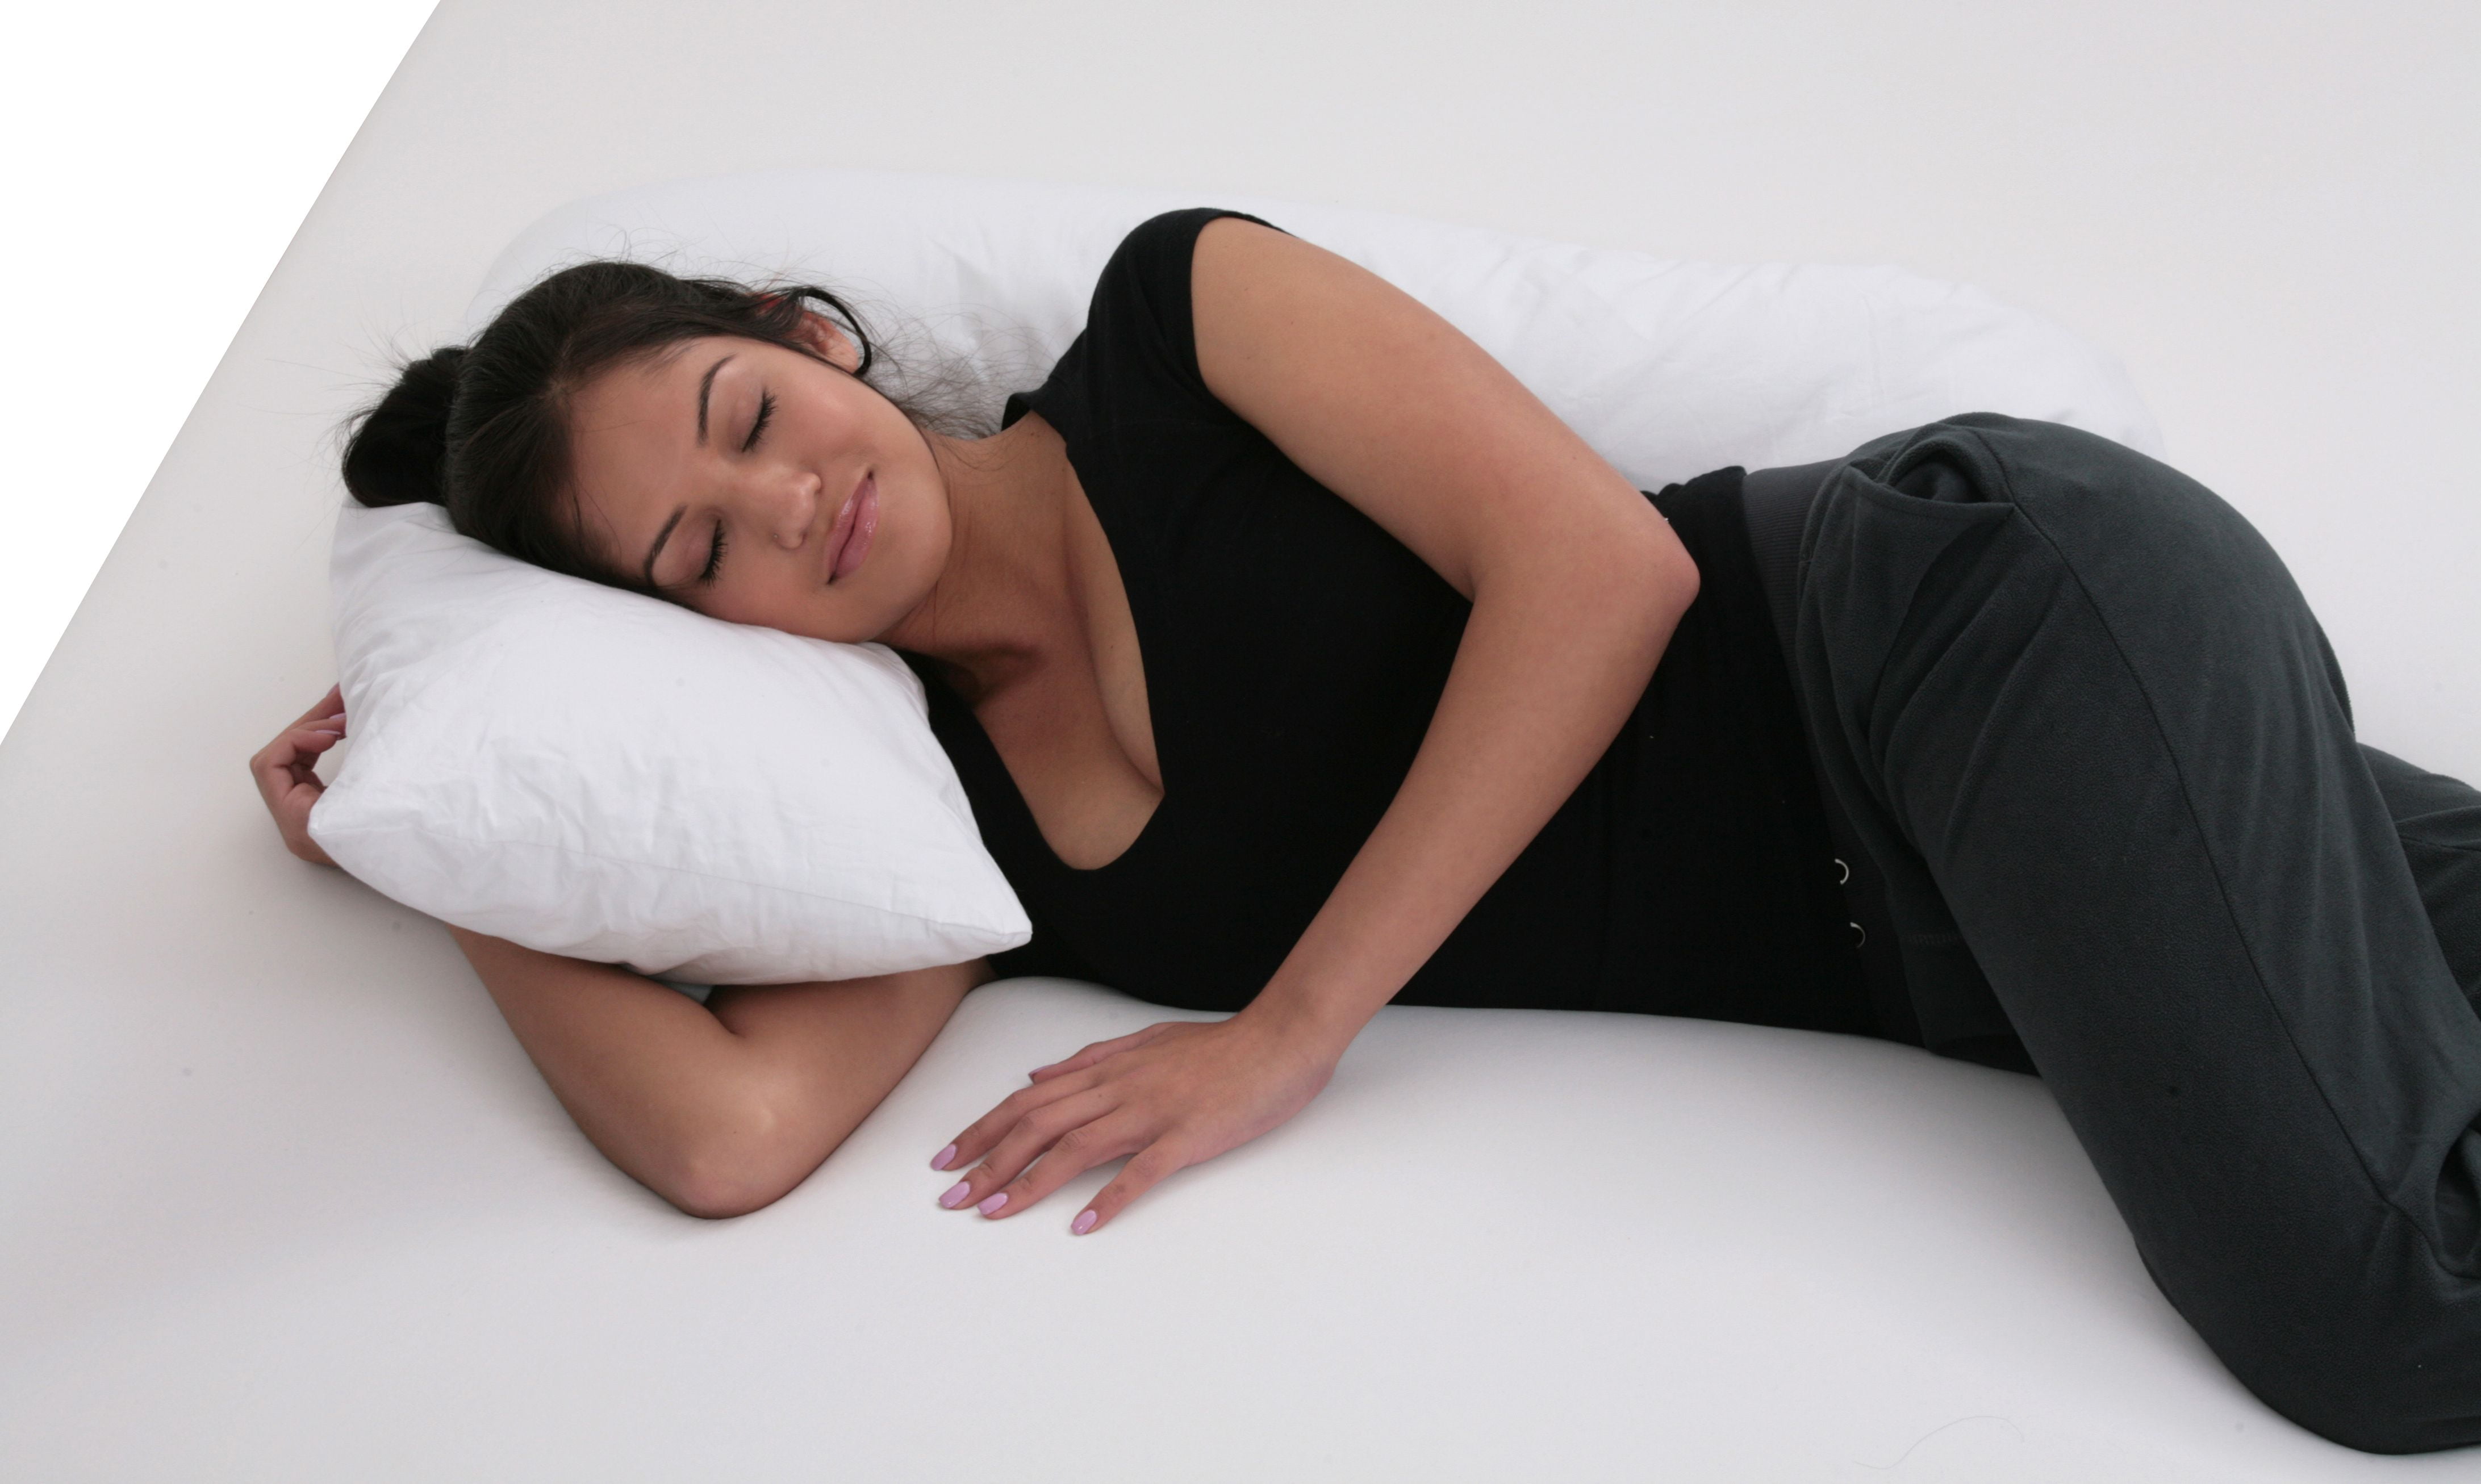 L Shaped Long Body Pregnancy Pillow with Neck Support for Side Sleeping -  Bed Bath & Beyond - 10812283